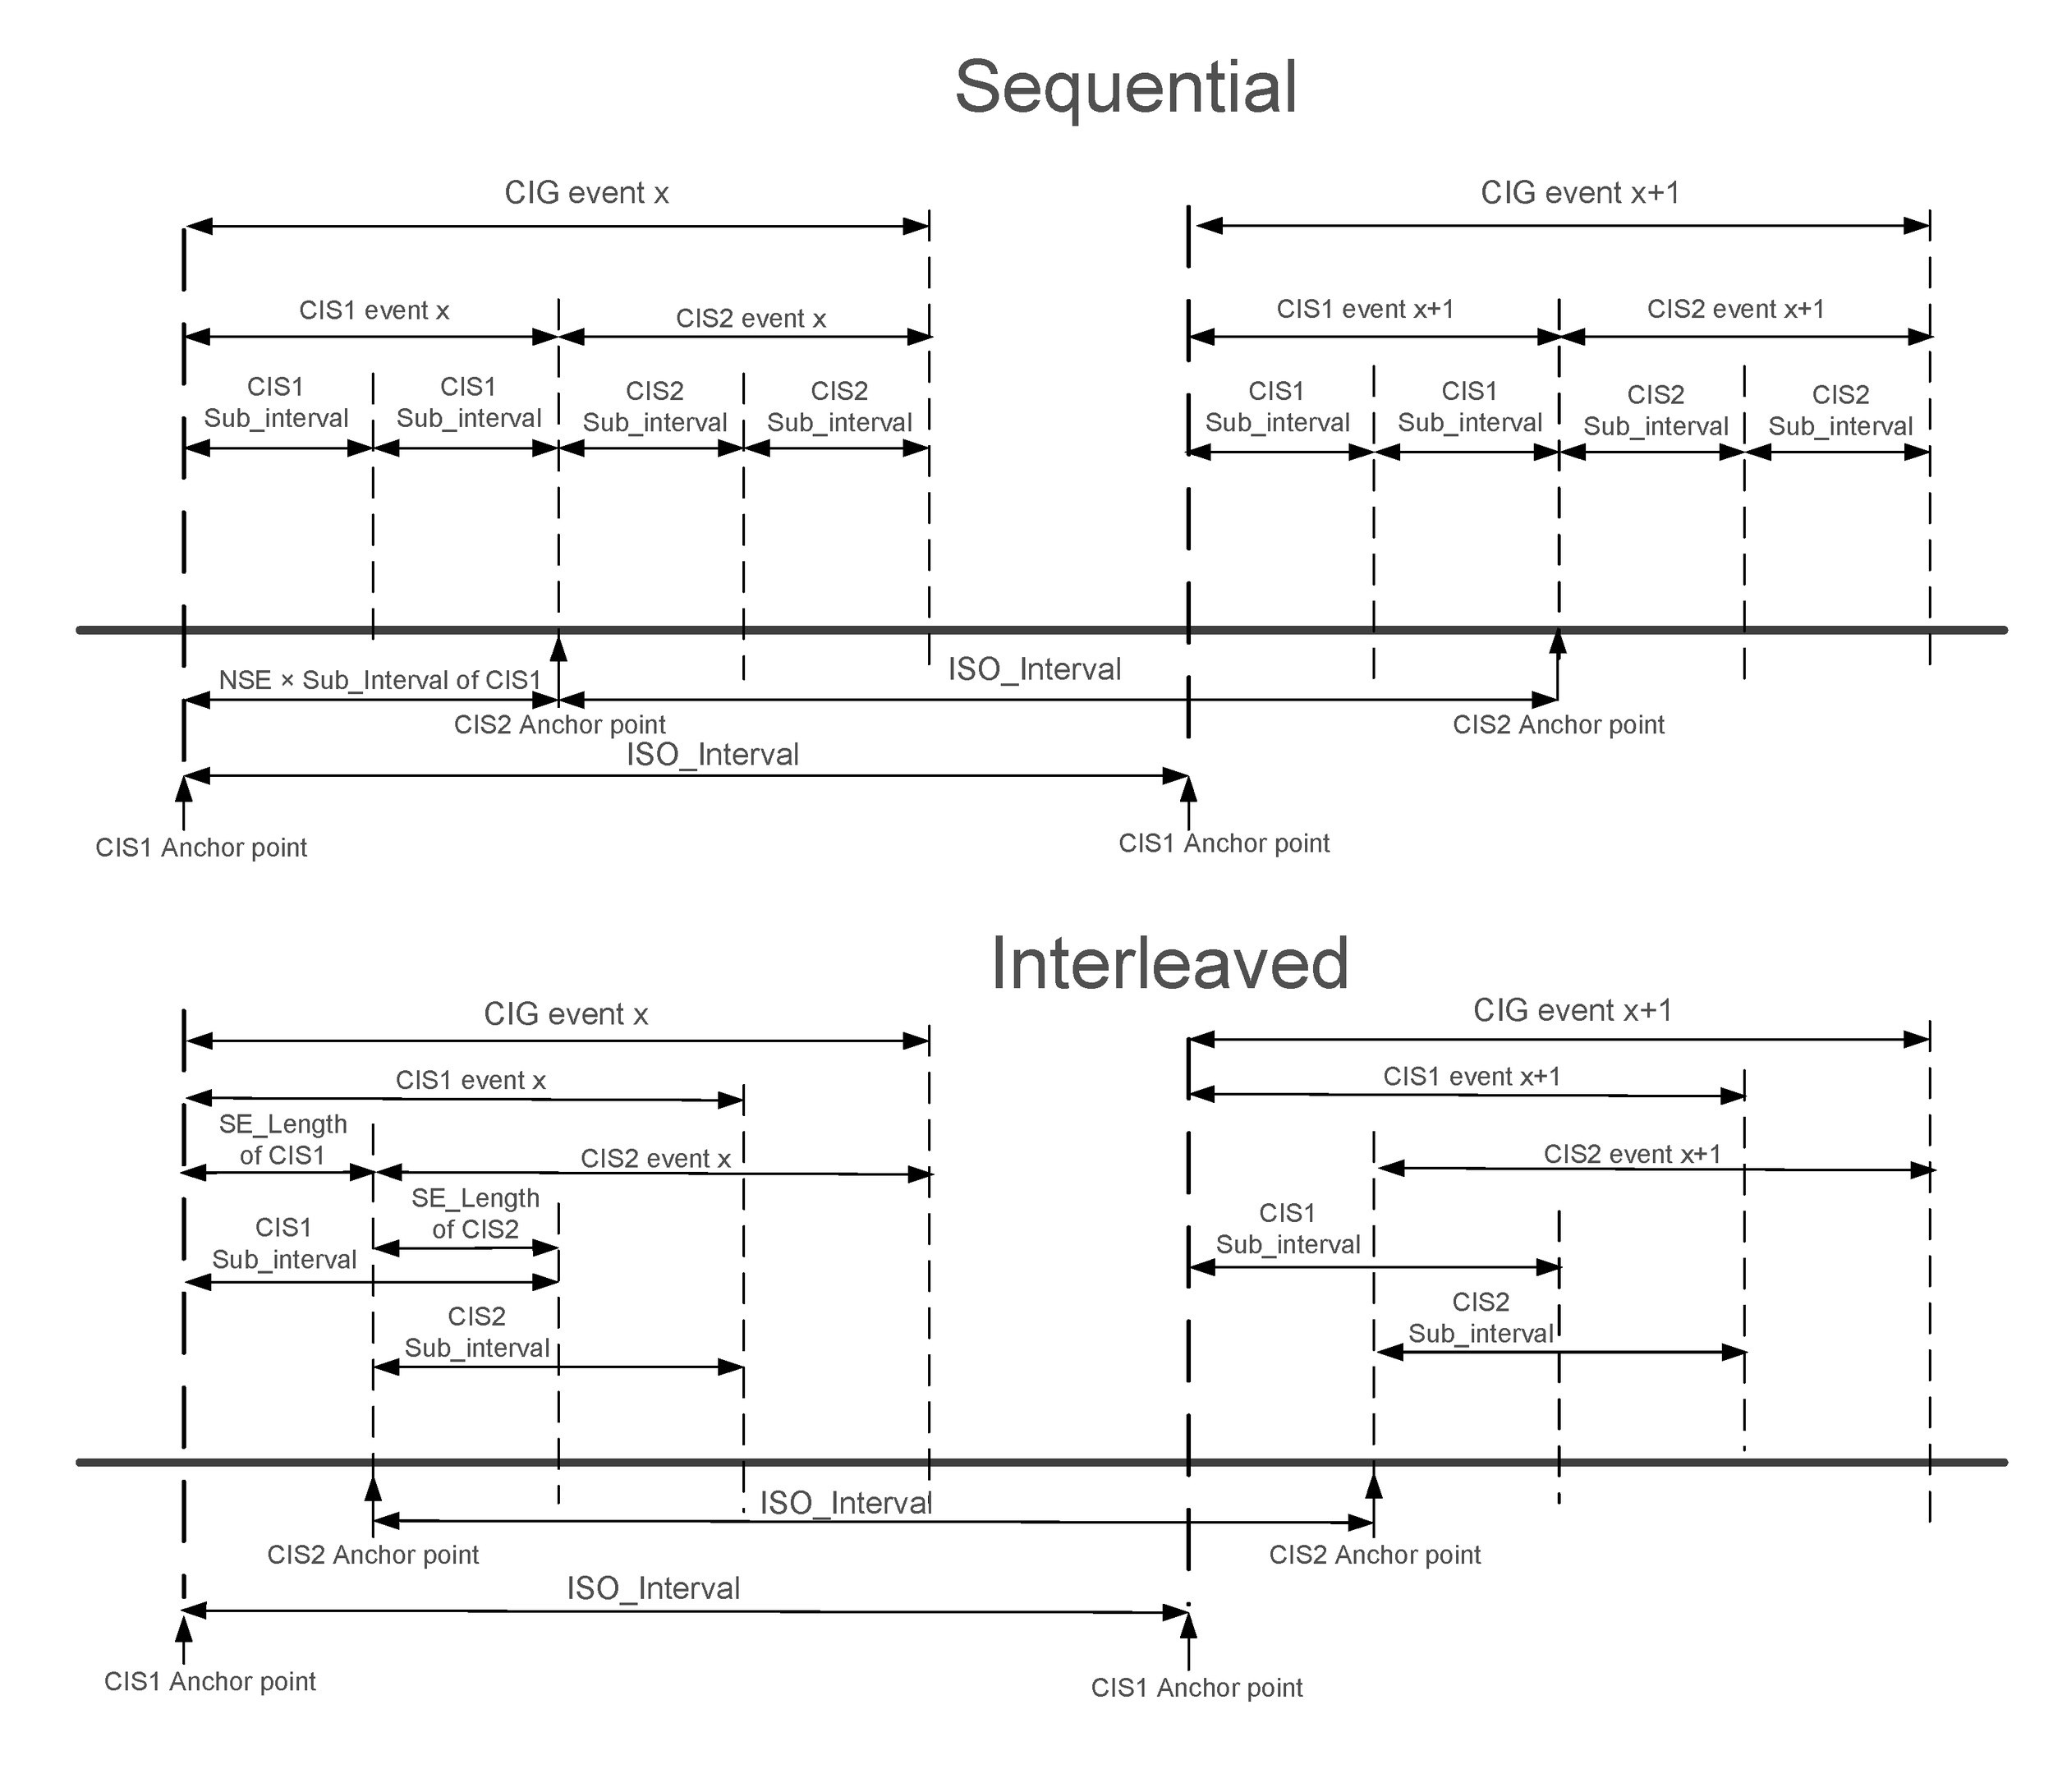 CIG event with events for two CISes in sequential and interleaved arrangement